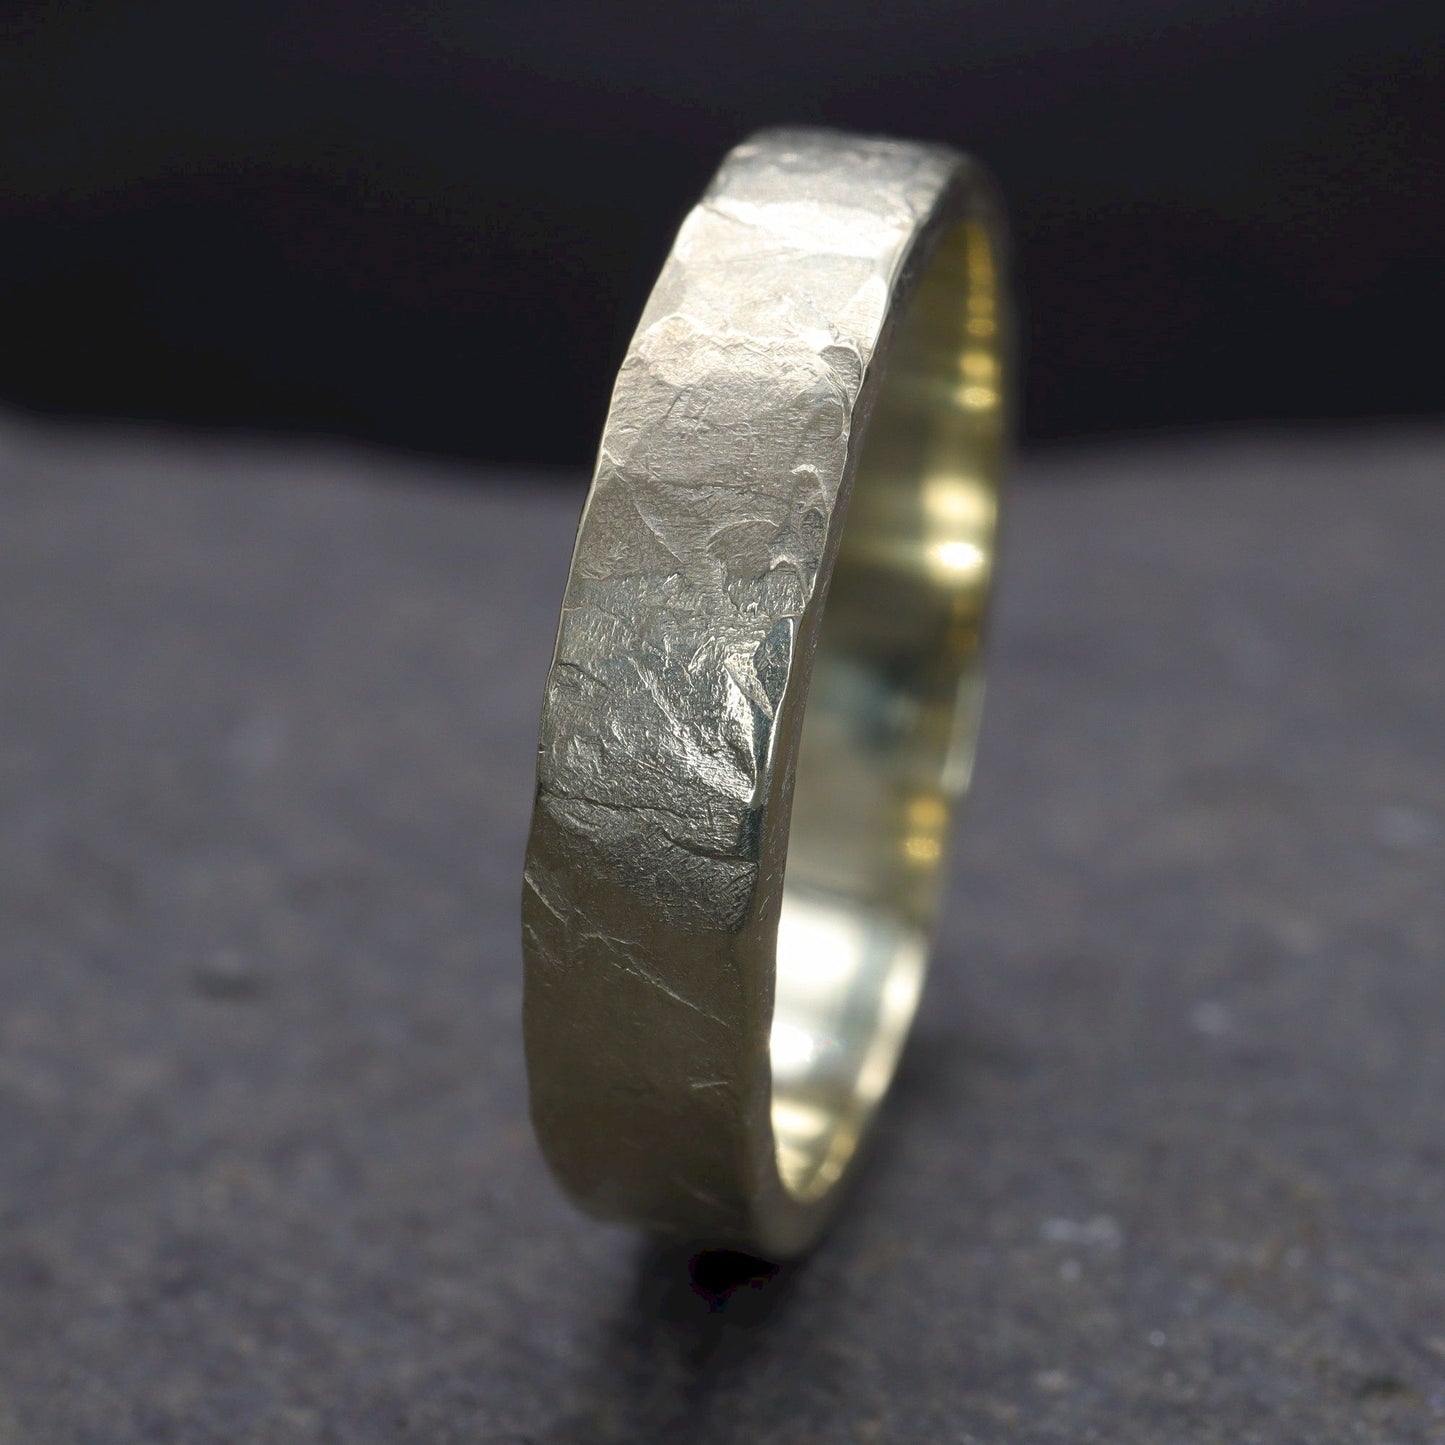 Yellow gold thin wedding ring - rustic flat hammered textured band - Windermere design.